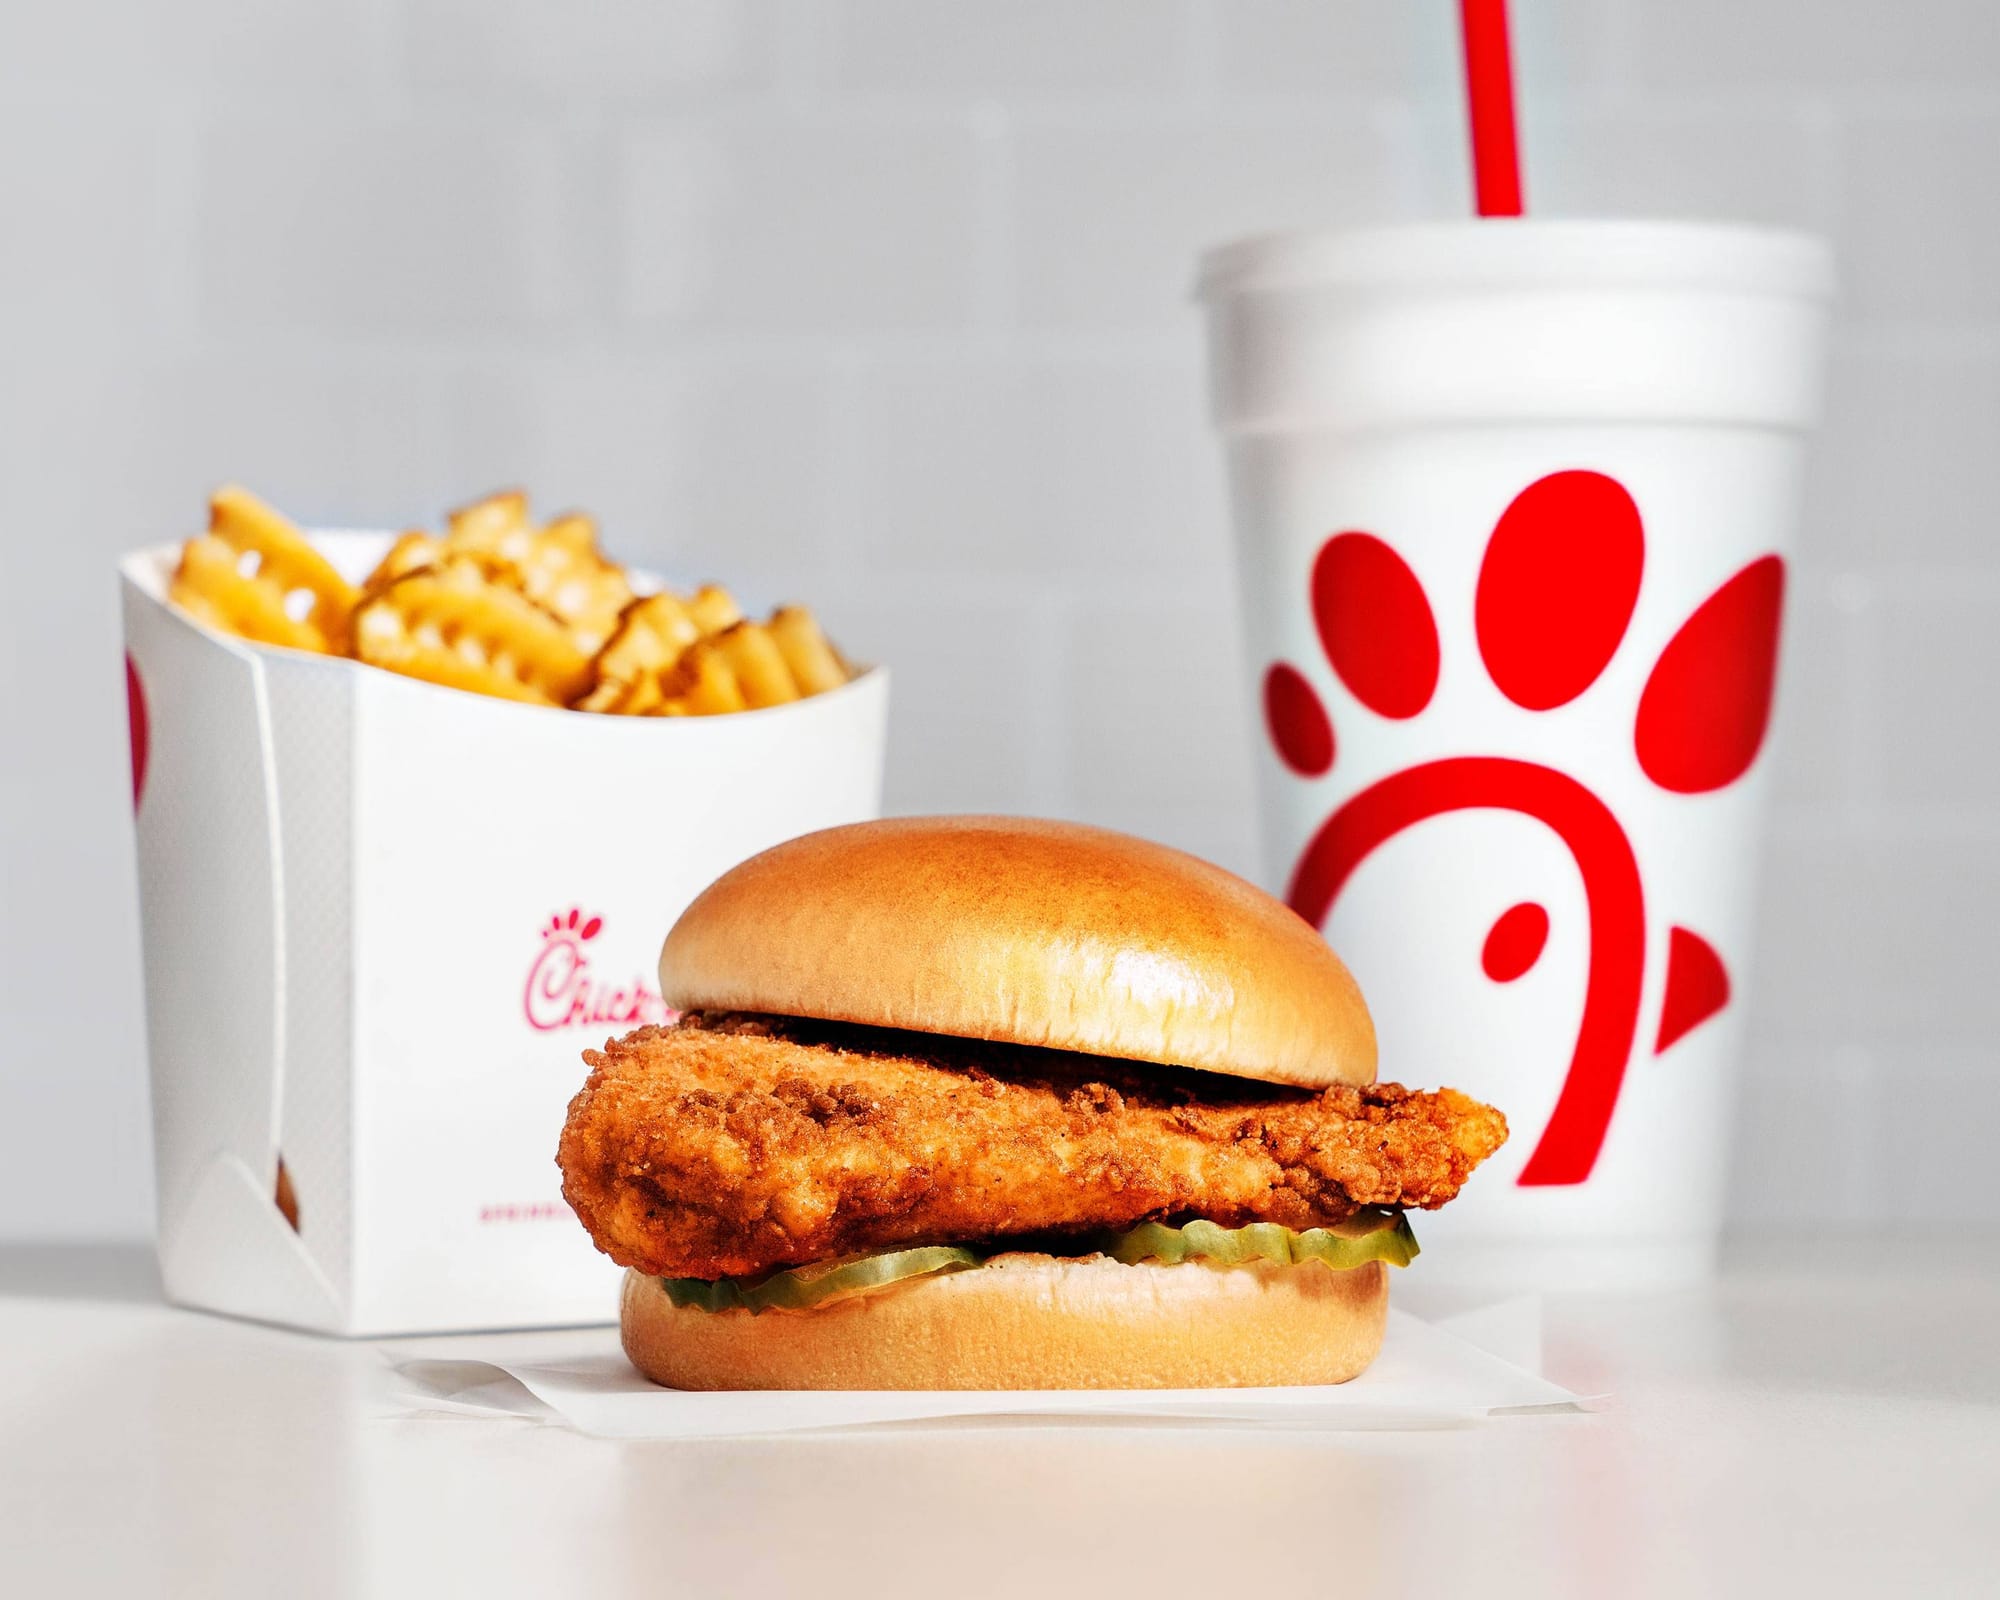 Chick-fil-A Alters Antibiotic Policy, Risking Customer Loyalty